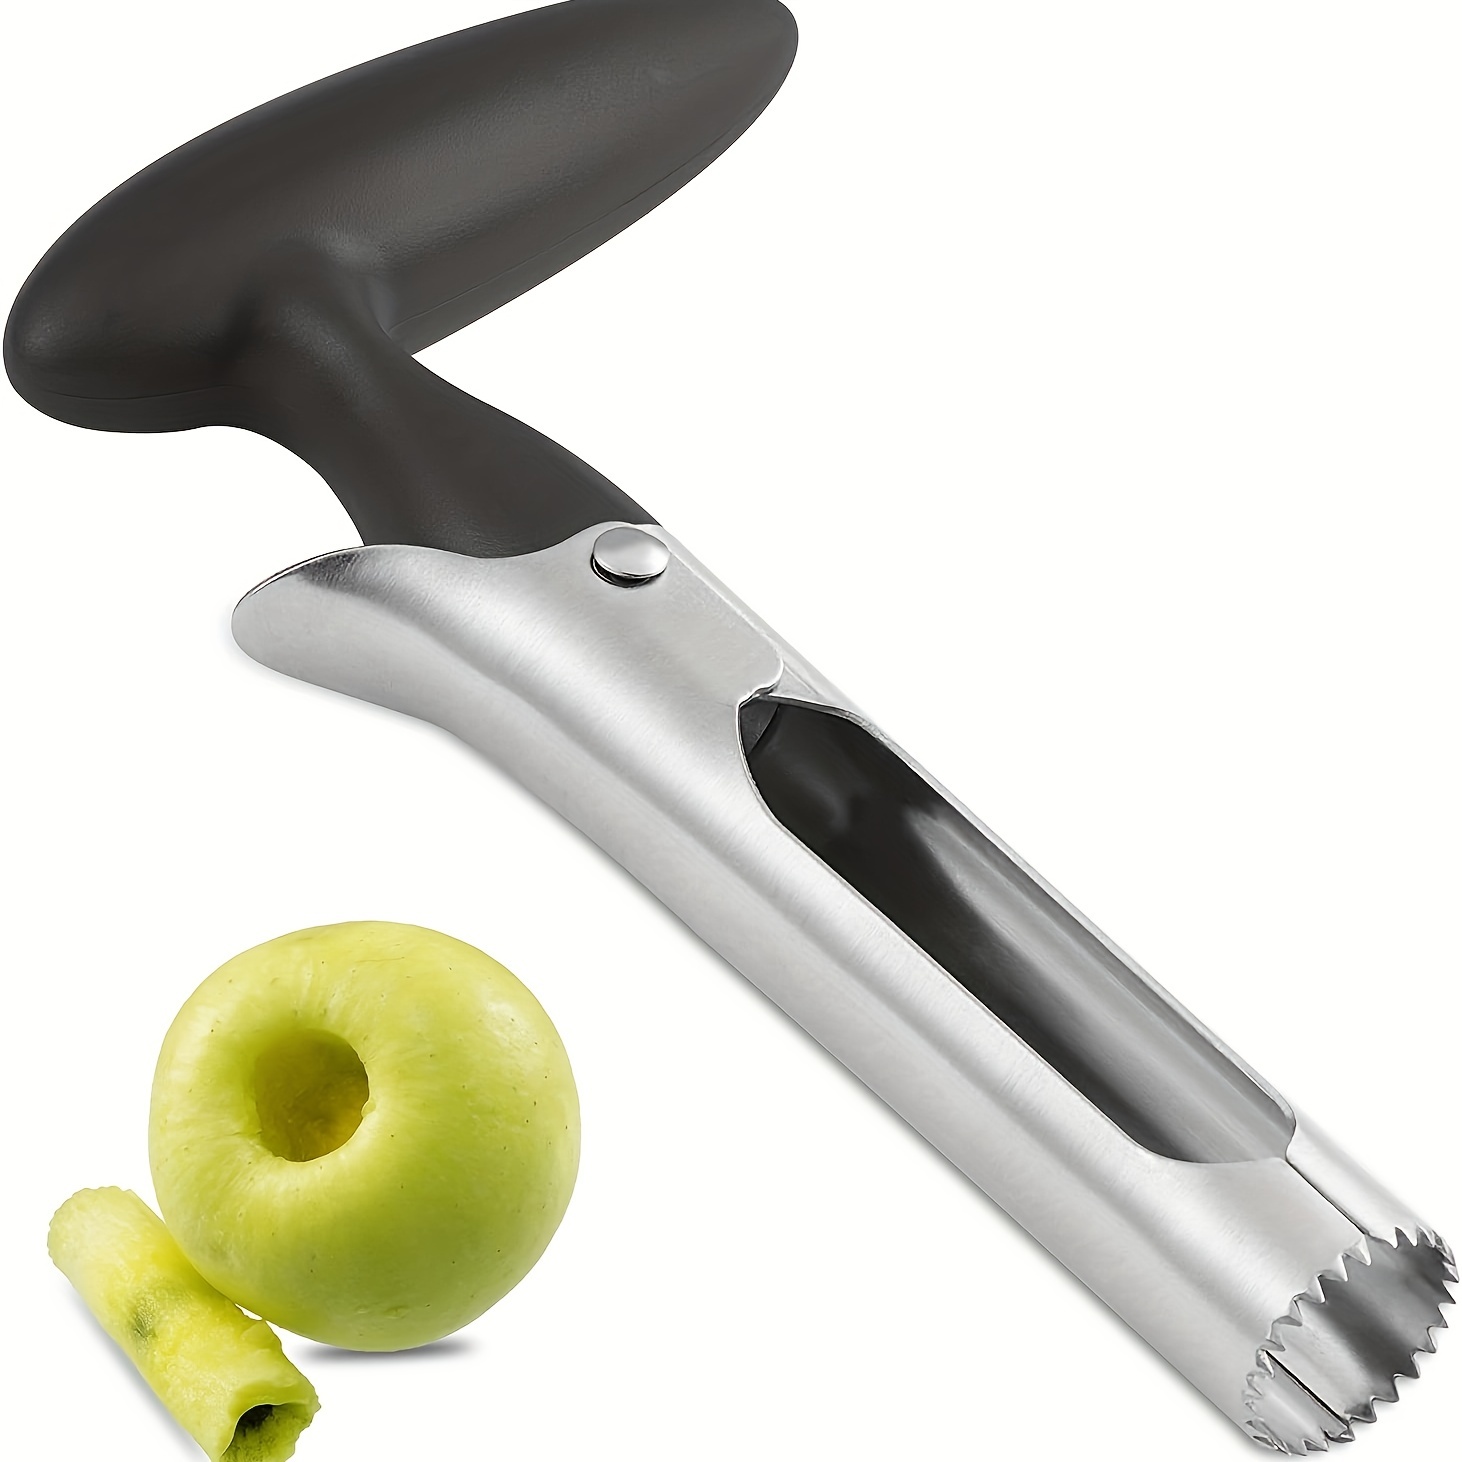 Pampered Chef Apple Corer Review